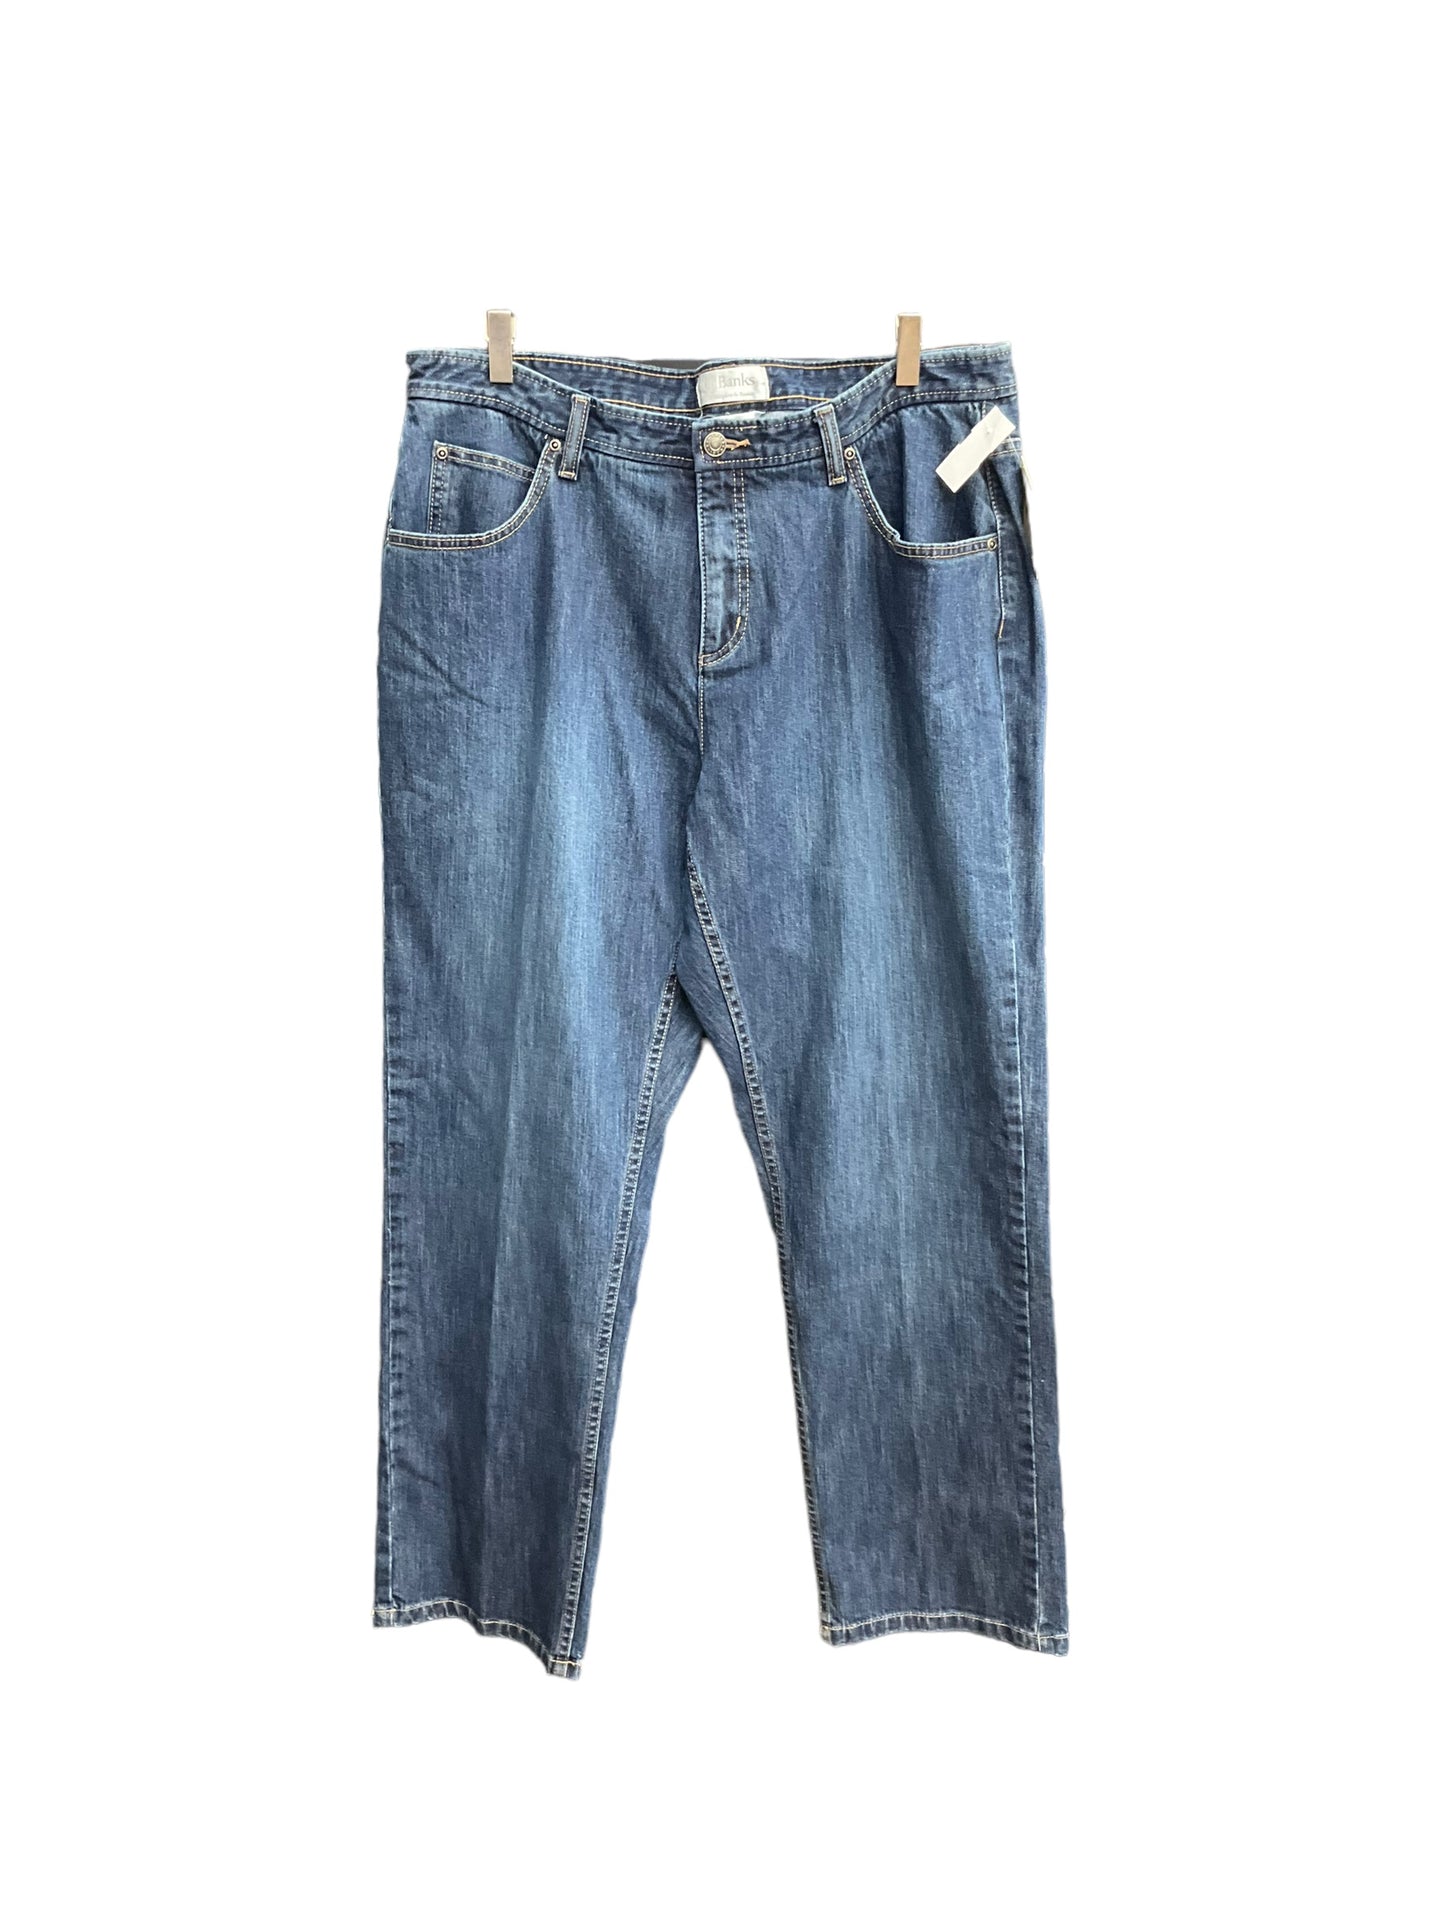 Jeans Straight By Cj Banks  Size: 16